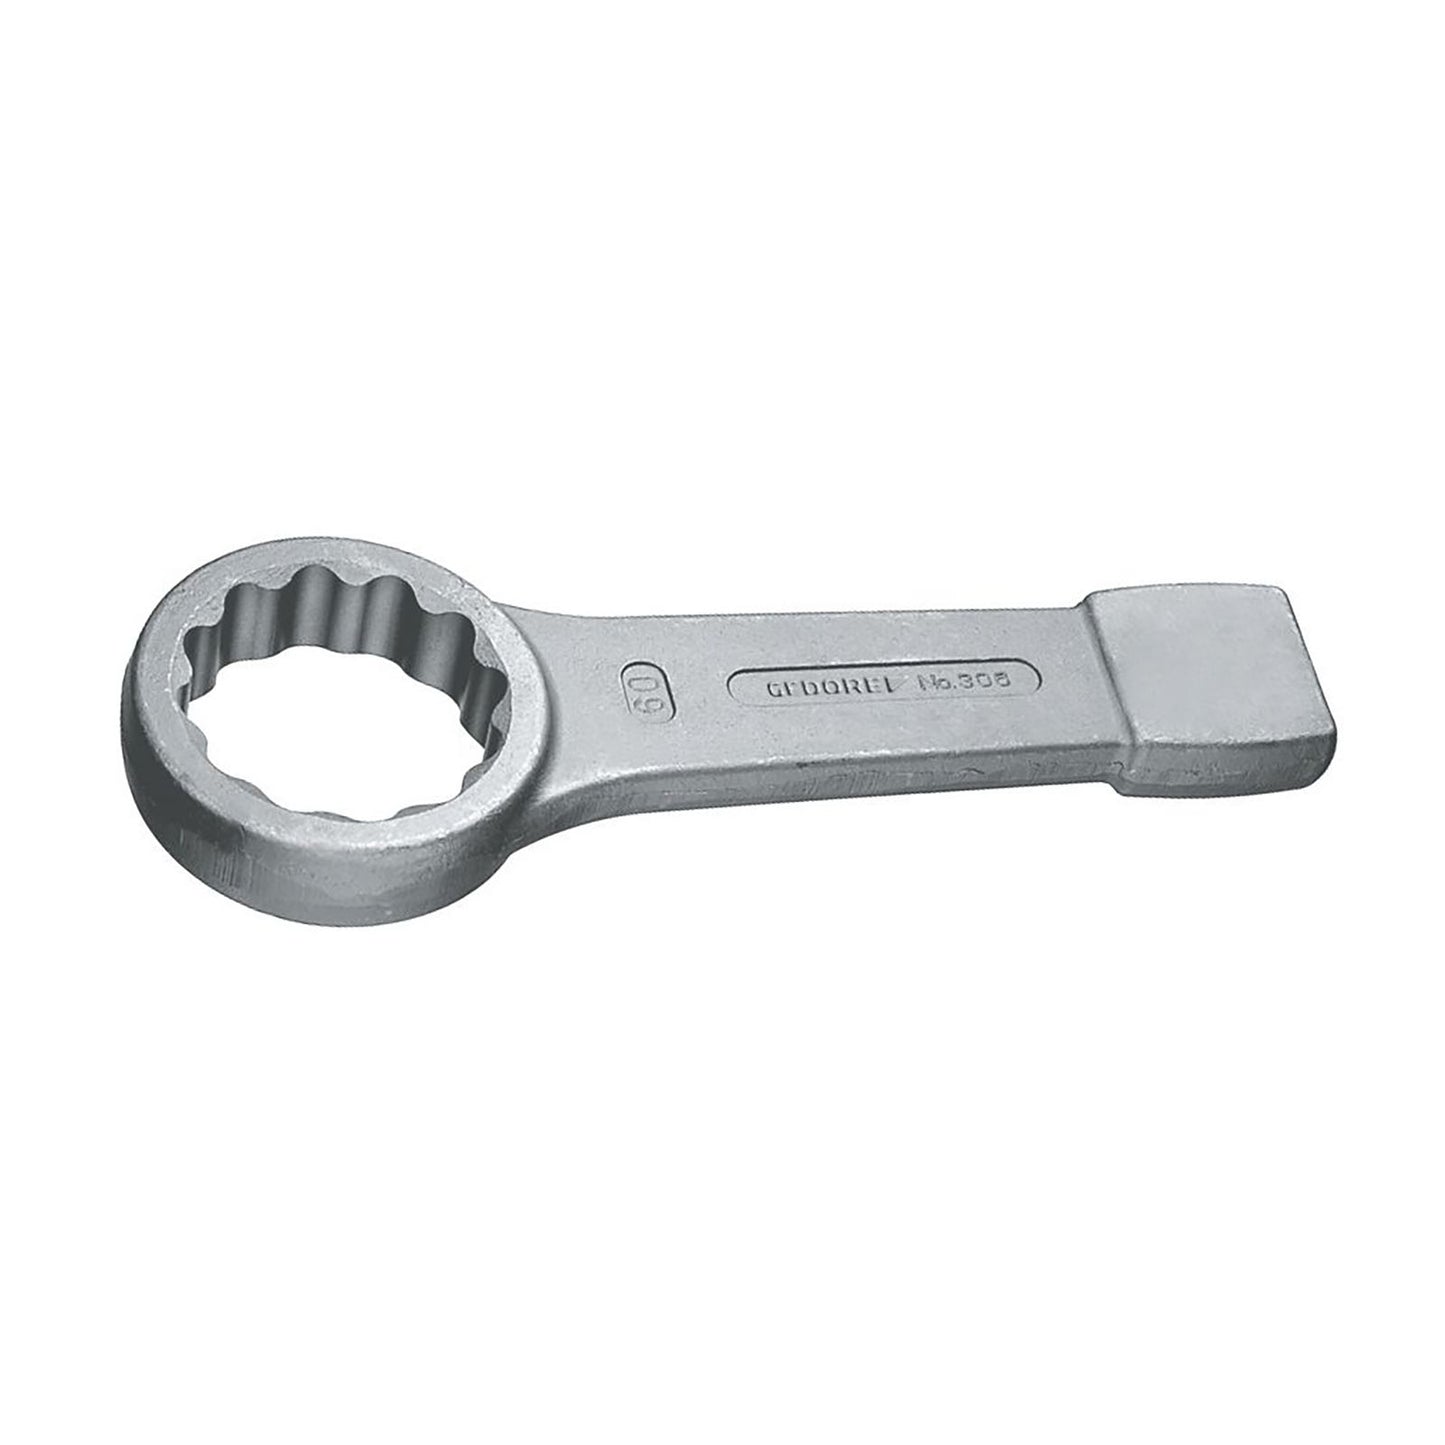 GEDORE 306 24 - Closed Strike Wrench, 24mm (6475000)